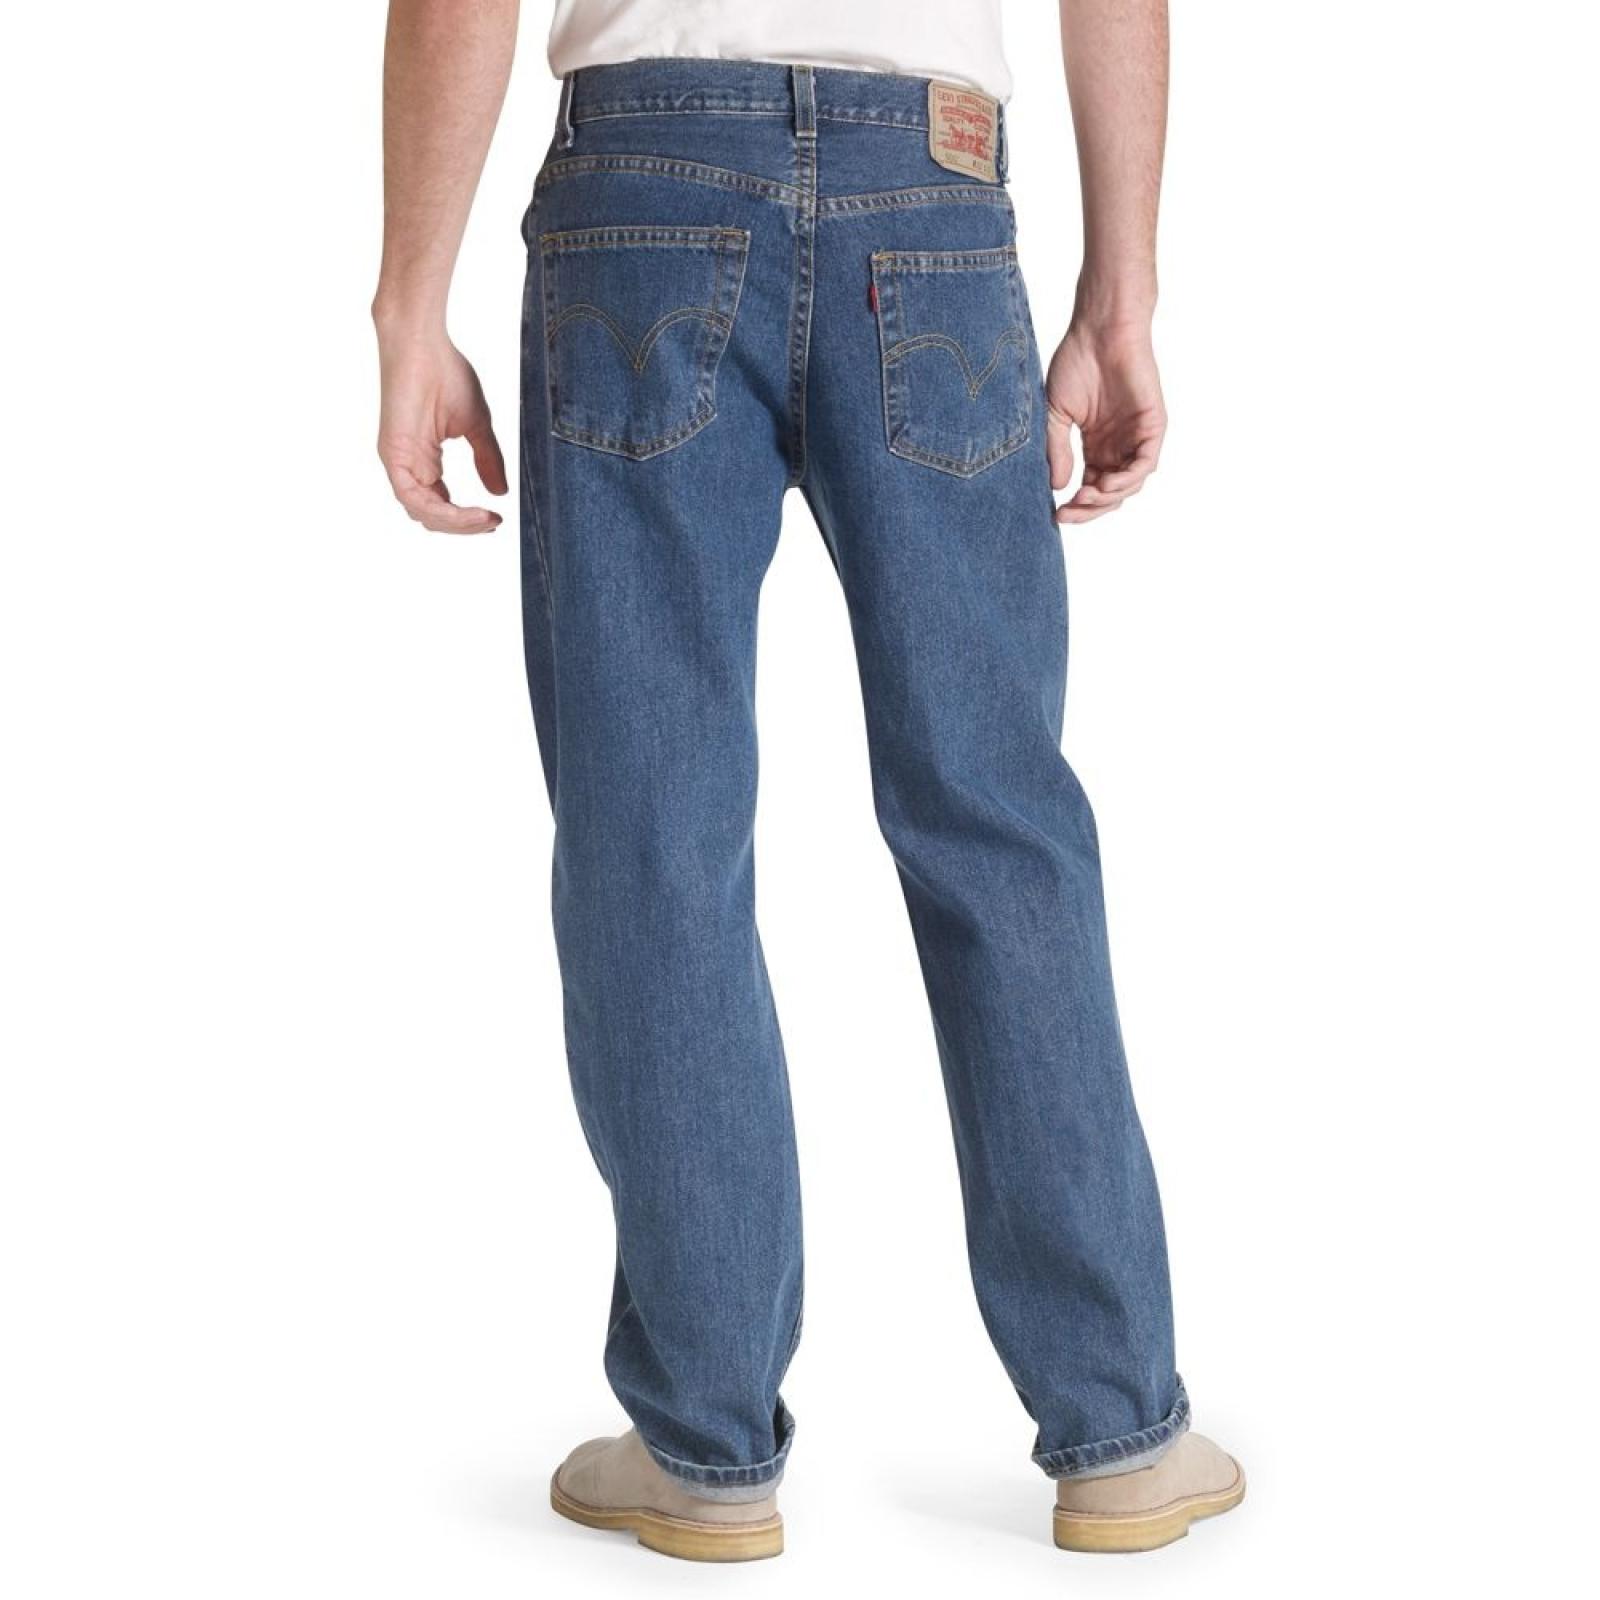 Levi's 550™ Relaxed Fit Men's Jeans